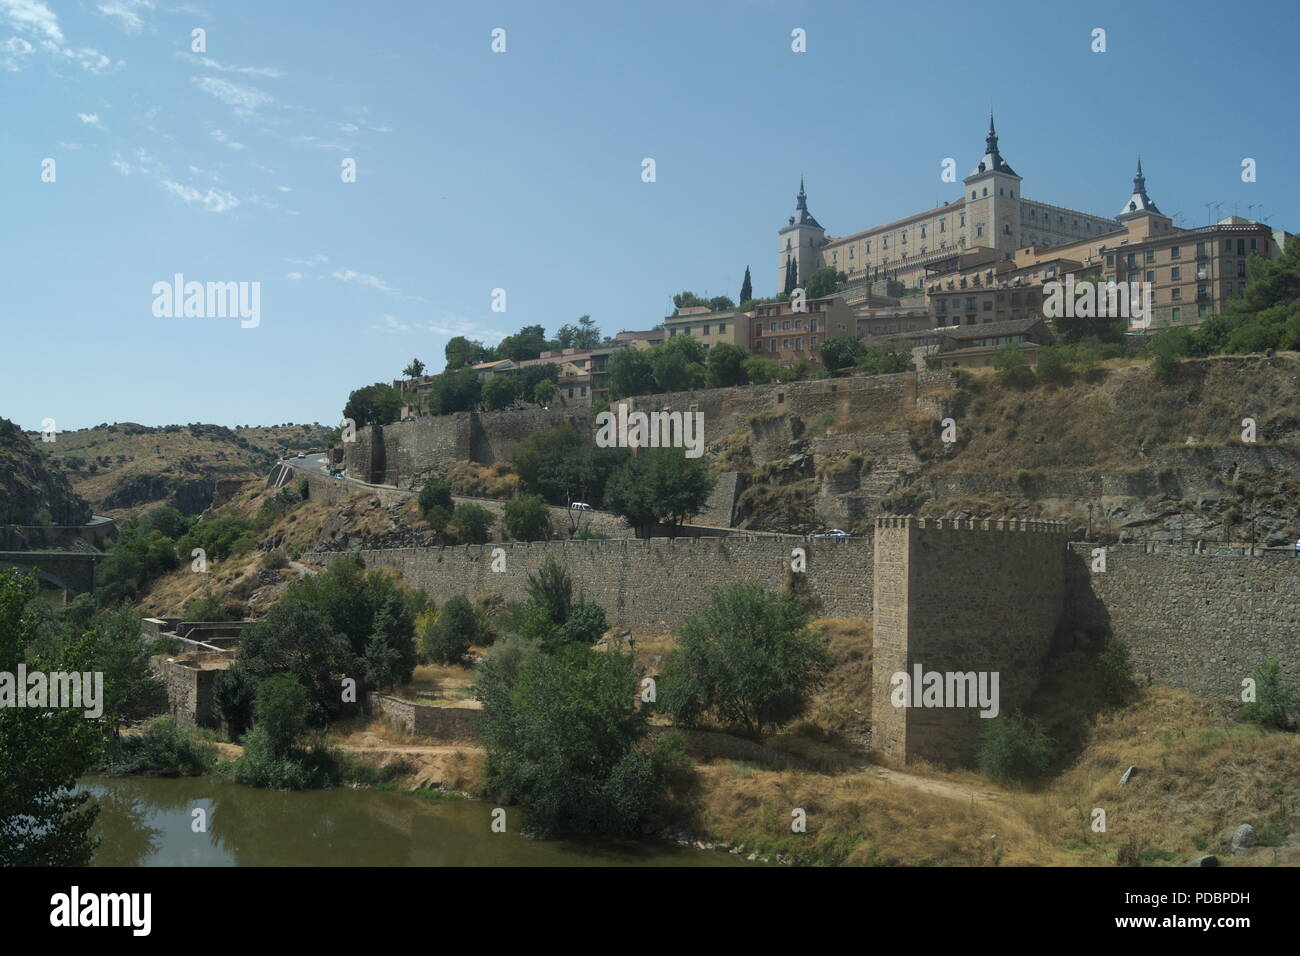 View of the historic Alcazar at the ancient Spanish city of Toledo. Defensive walls line the riverbank and the old monument stands proud on the hill. Stock Photo